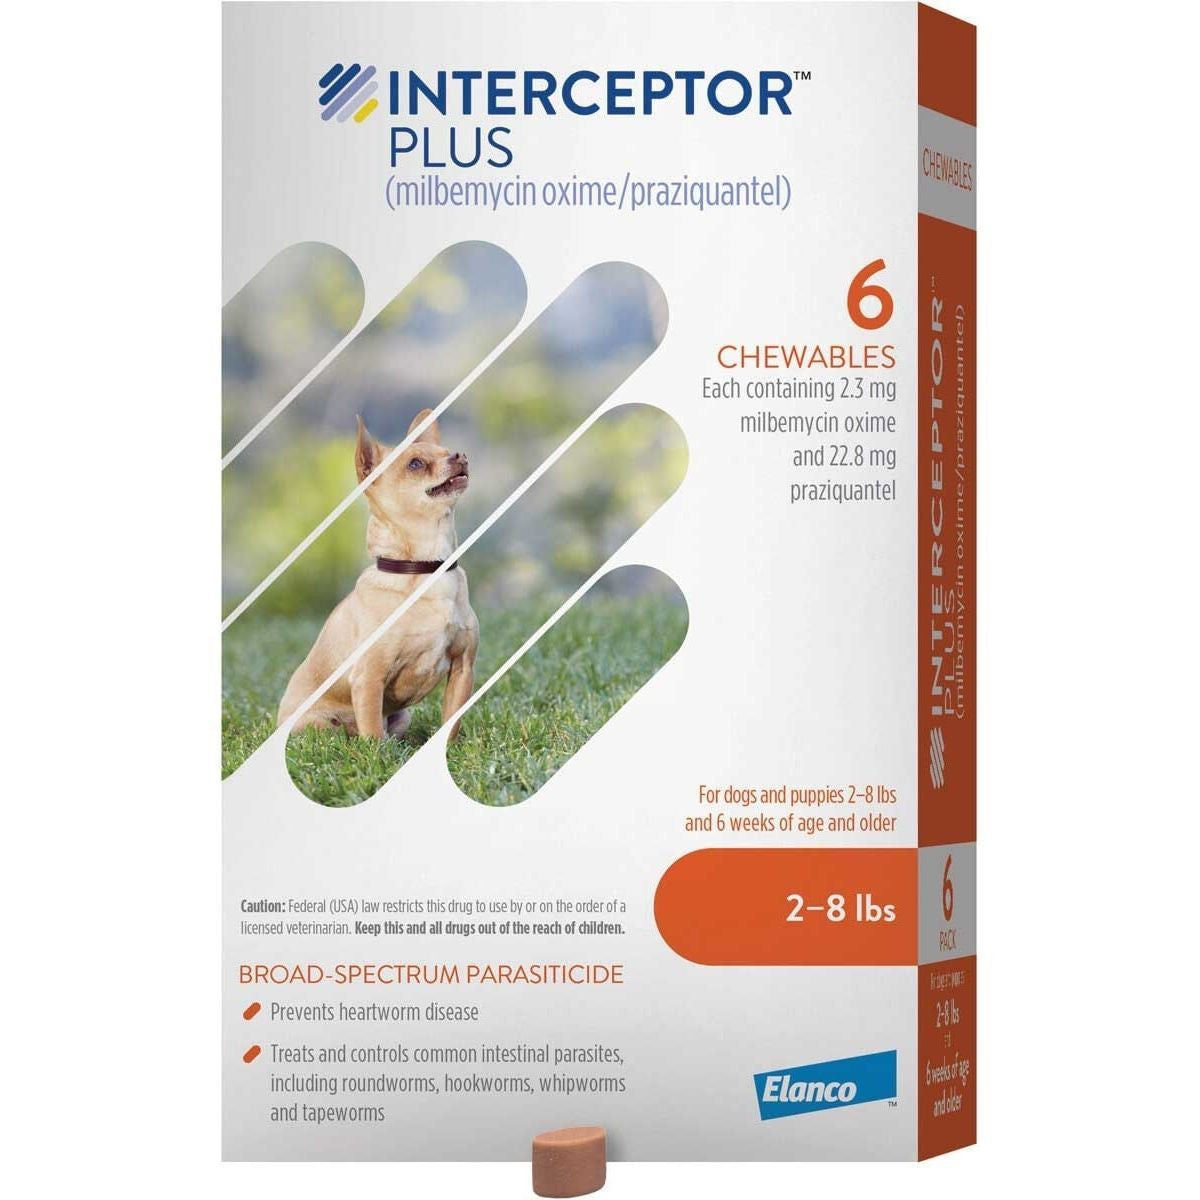 Interceptor Plus Chewables for Dogs 6 Pack - Prescription Required